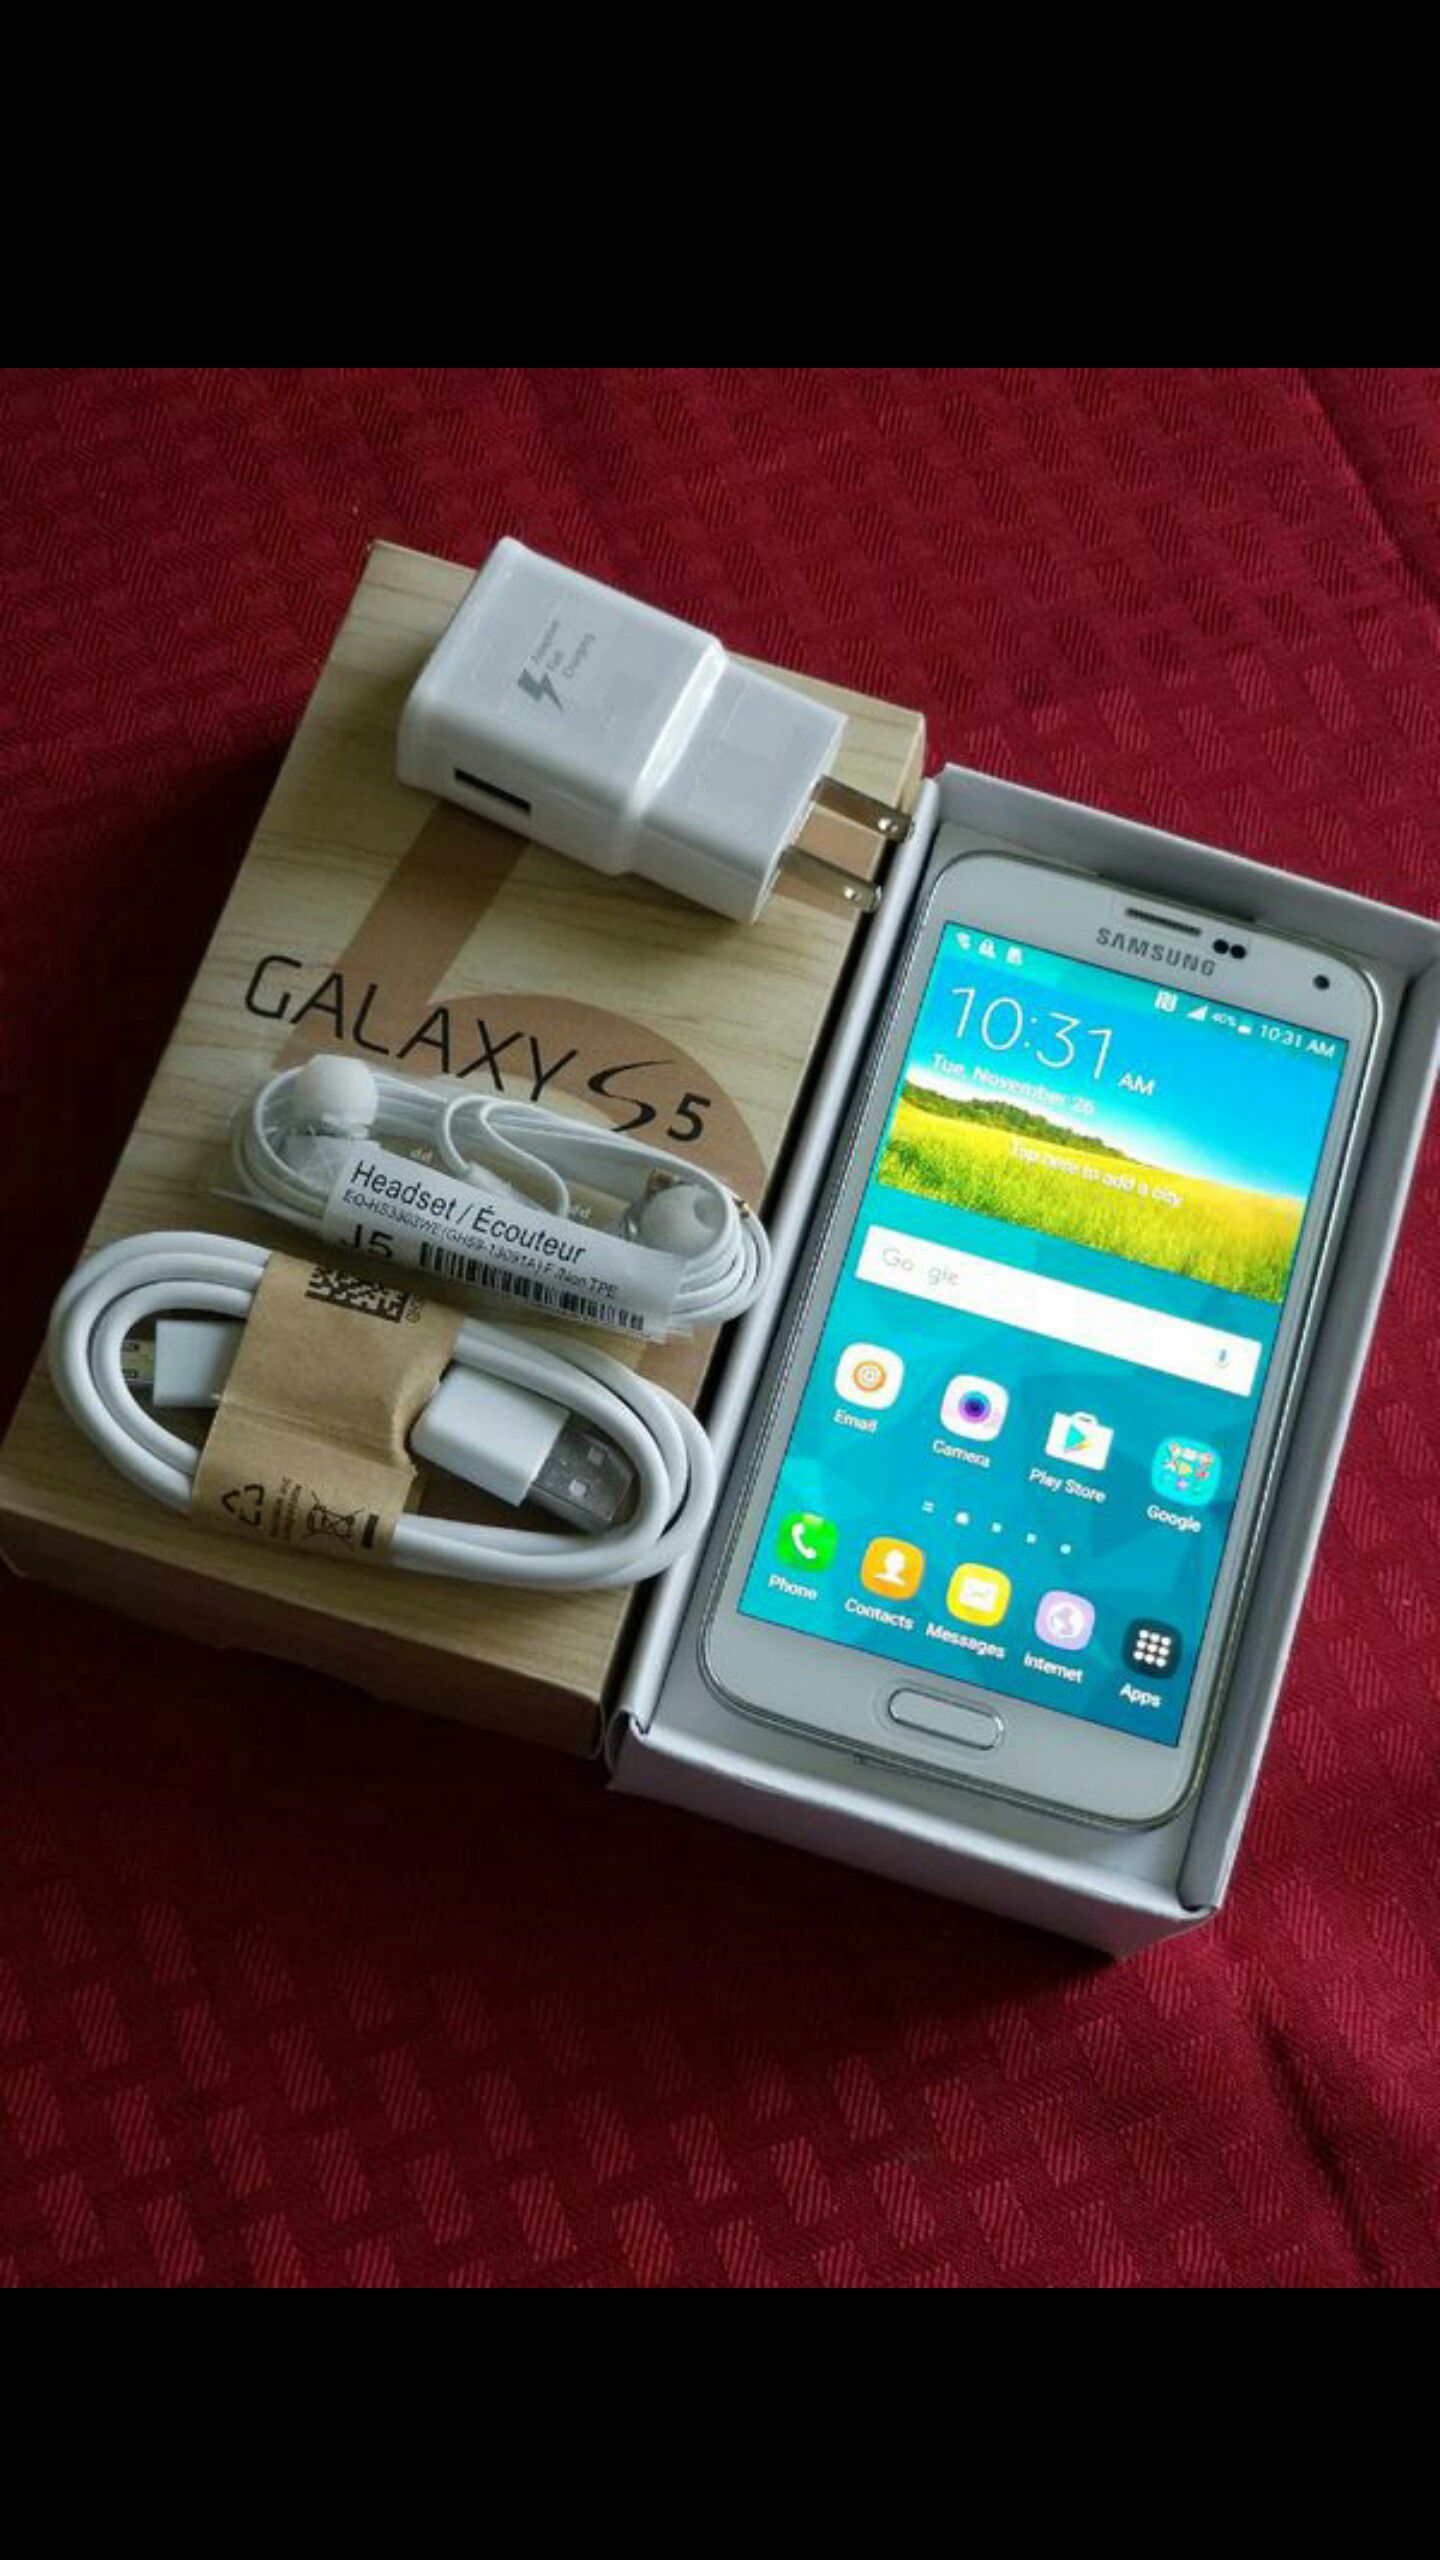 SAMSUNG Galaxy S5, Factory UNLOCKED//Excellent Condition// As like New//Price is Negotiable